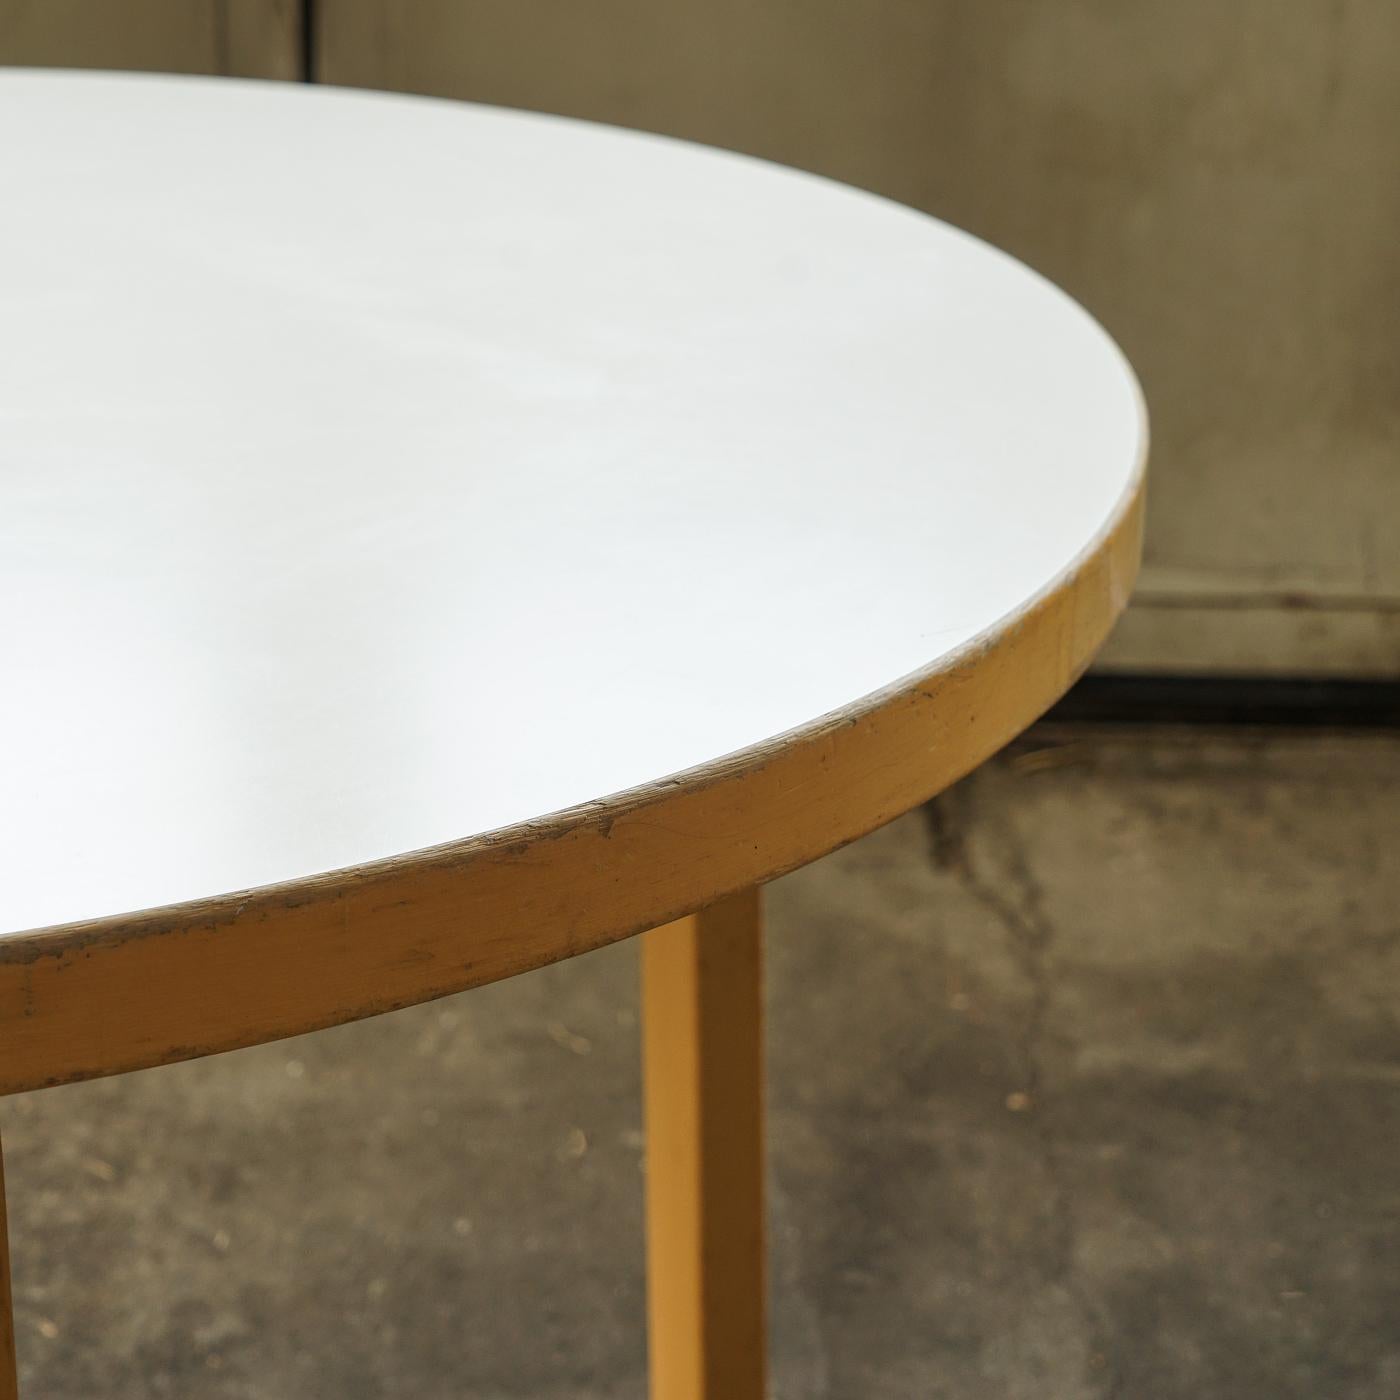 This original table, model 91 was designed by Alvar Aalto in 1935 for Artek, Finland. It is one piece of the famous L-leg-collection and is made of finish birchwood. The legs are bended in a special developed technique. The 4cm tabletop is veneered